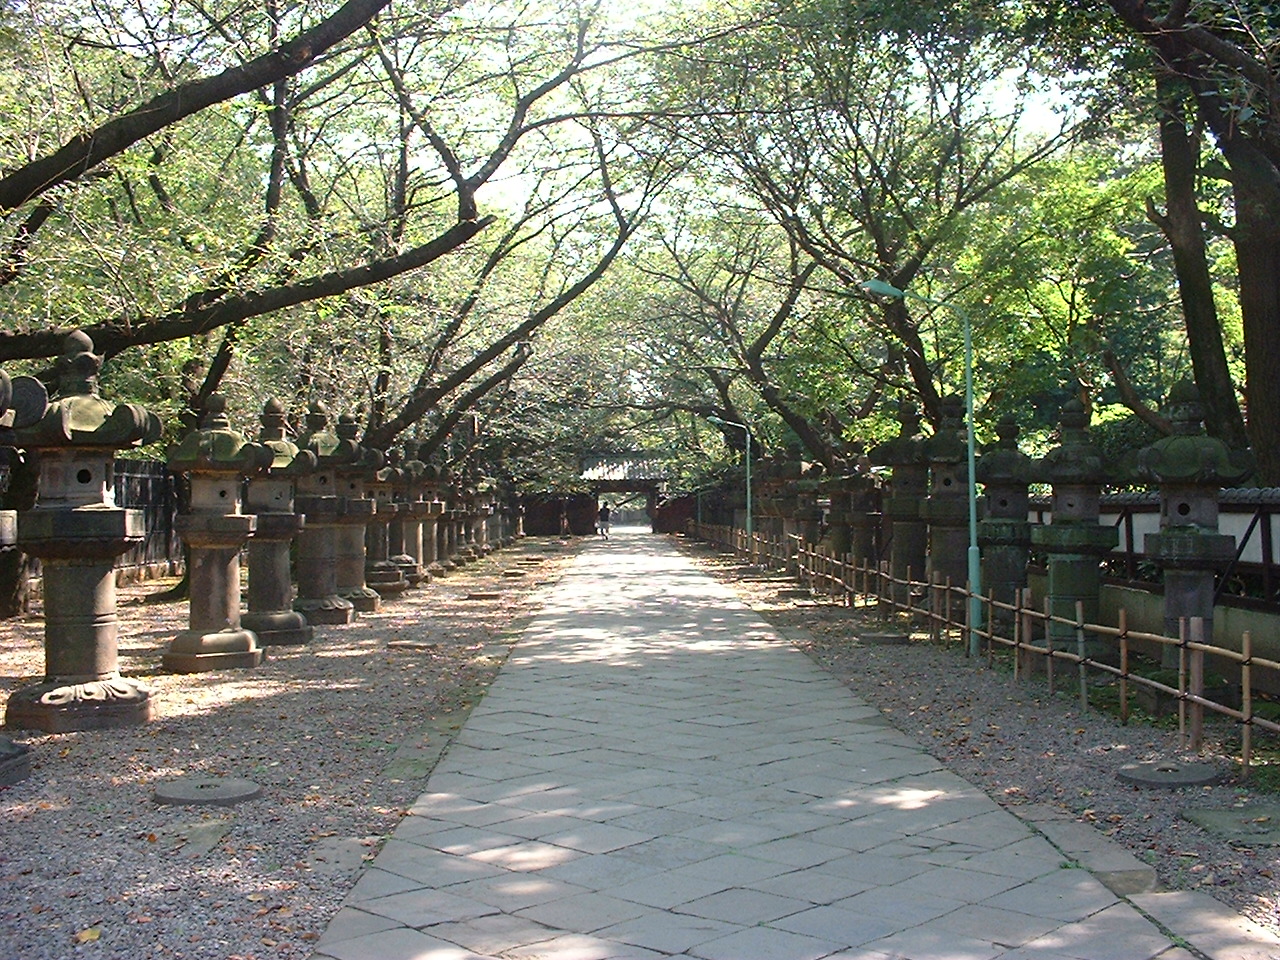 trees provide a canopy above a path lined with stone lanterns